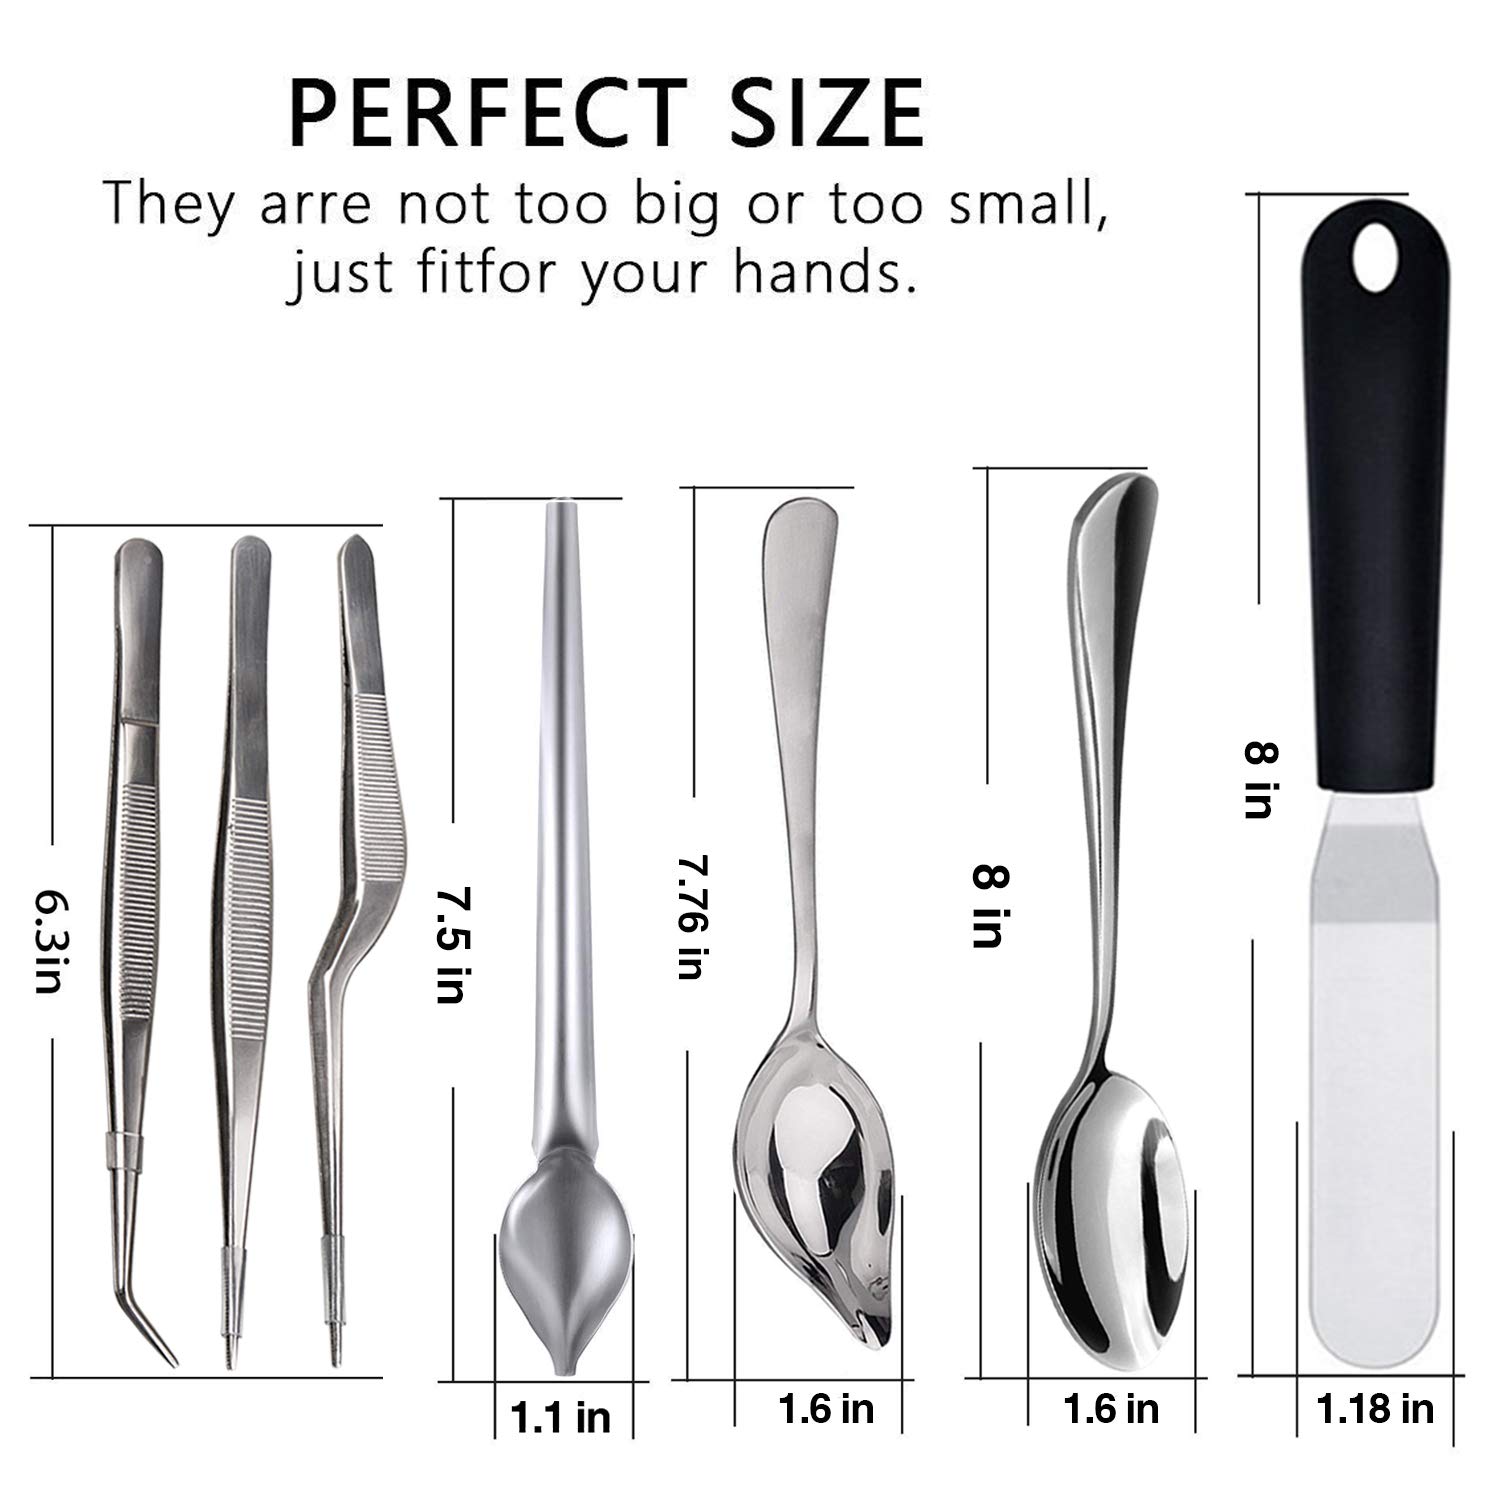 7 Piece Stainless Steel Culinary Specialty Tools Set for Professional Chefs and Home Cooks